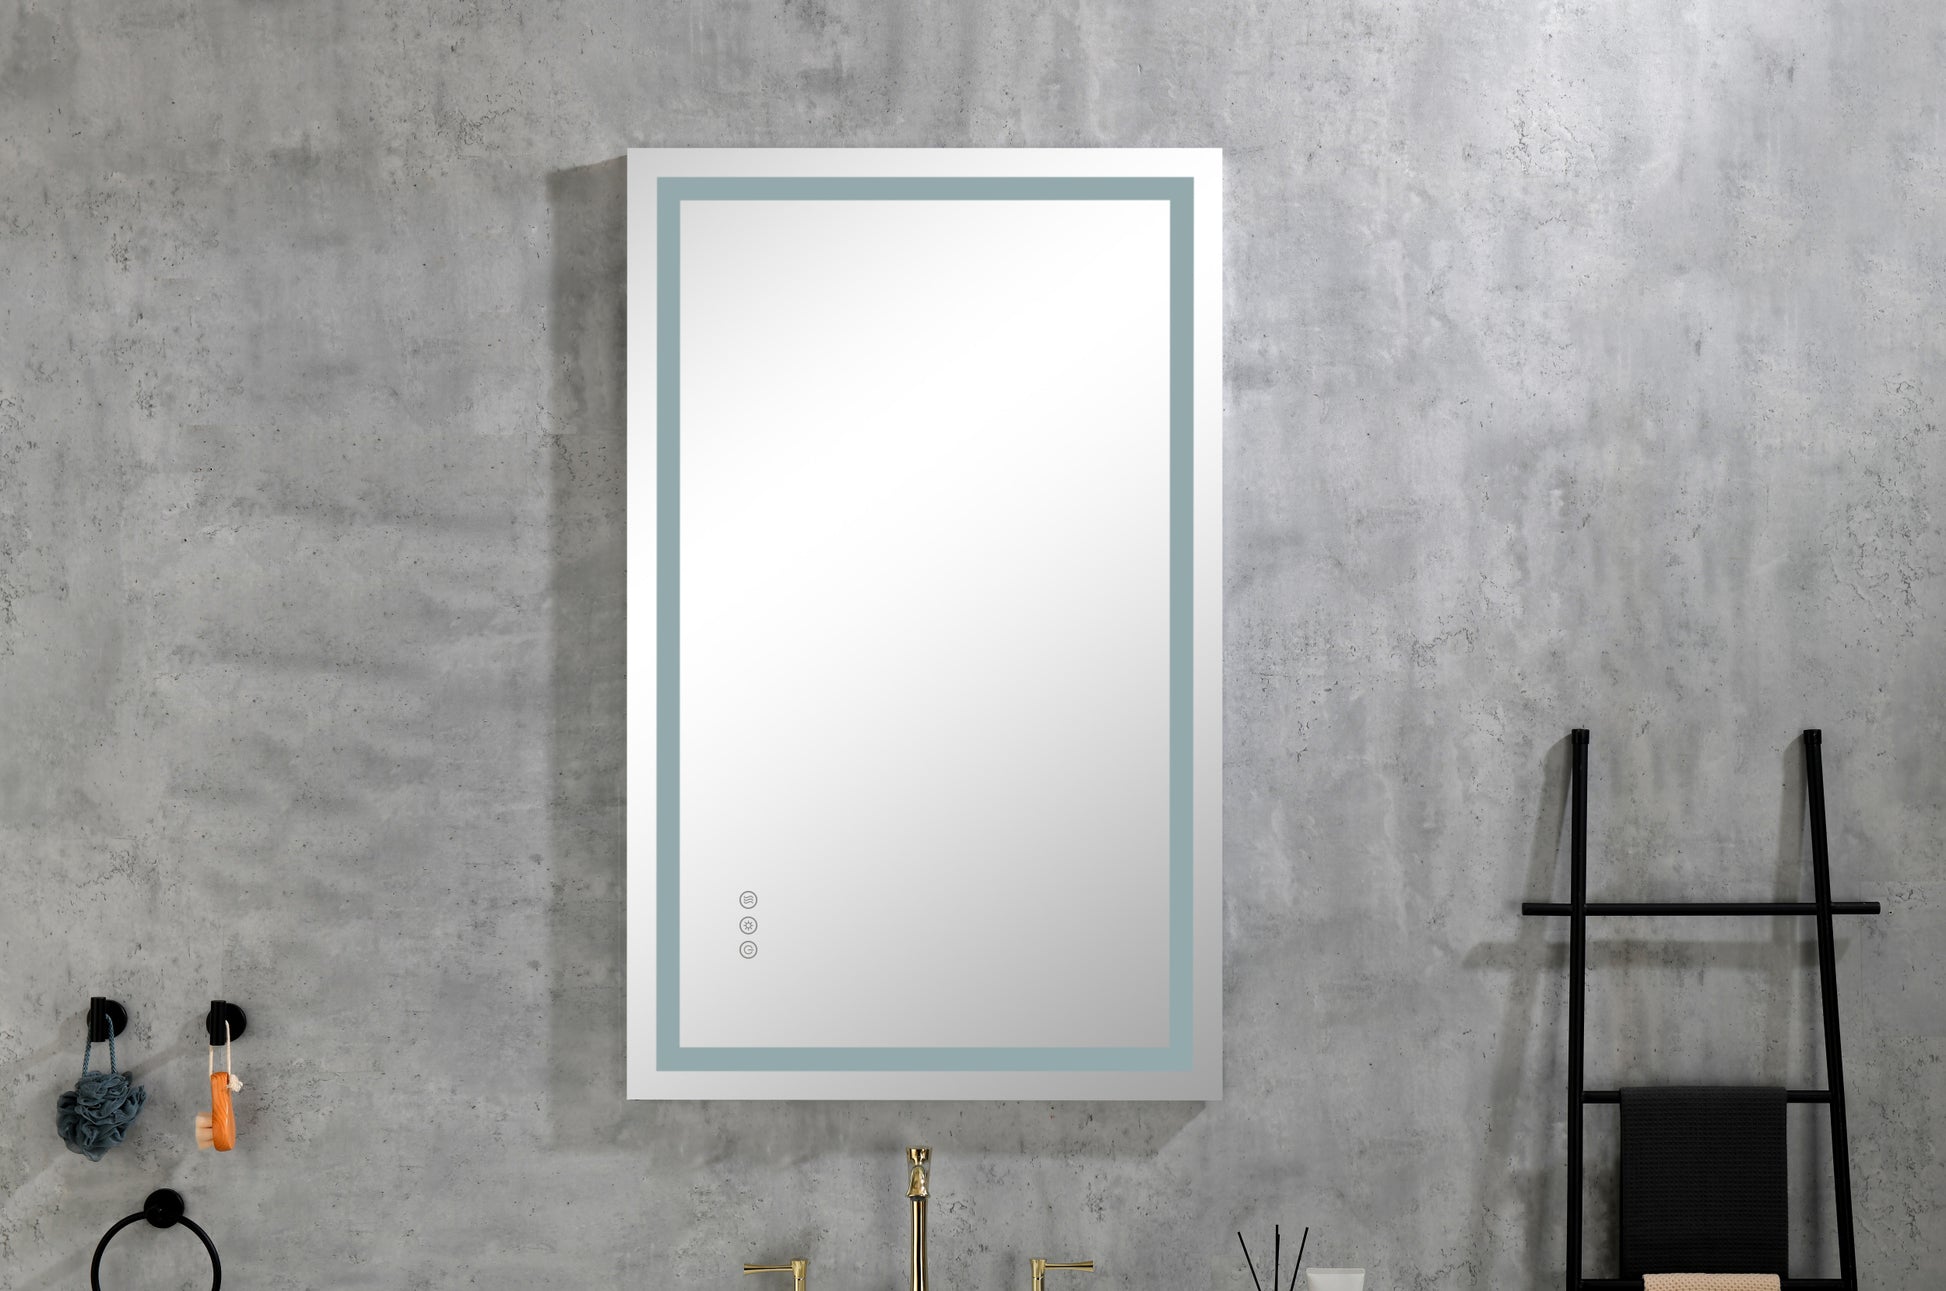 36*30in Led Mirror for Bathroom with white-aluminum